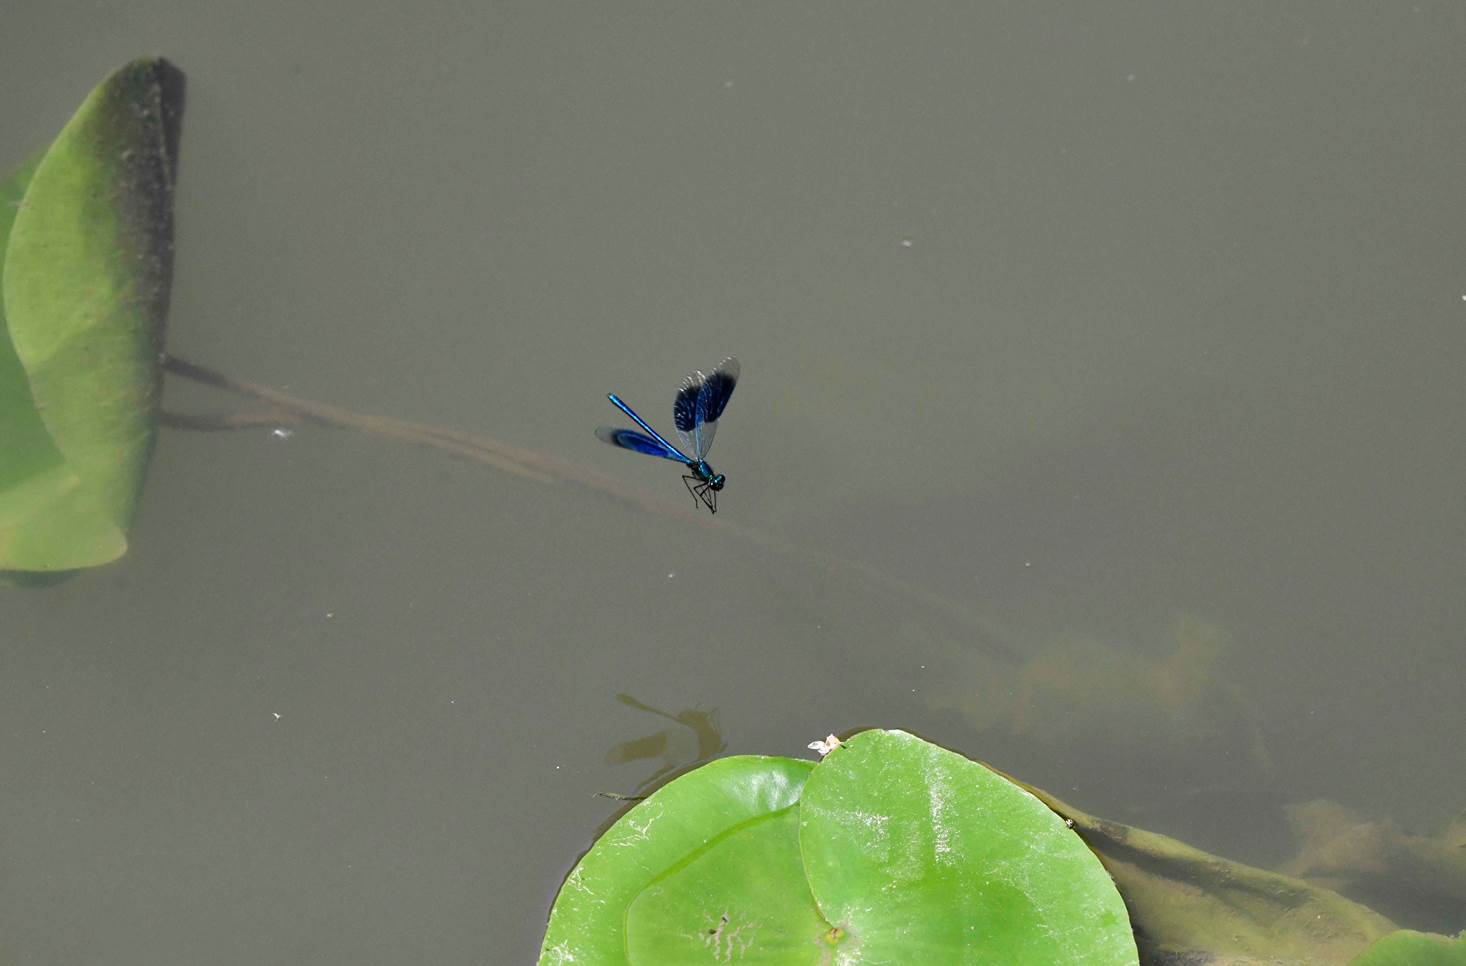 A dragonfly on a line in water

Description automatically generated with medium confidence